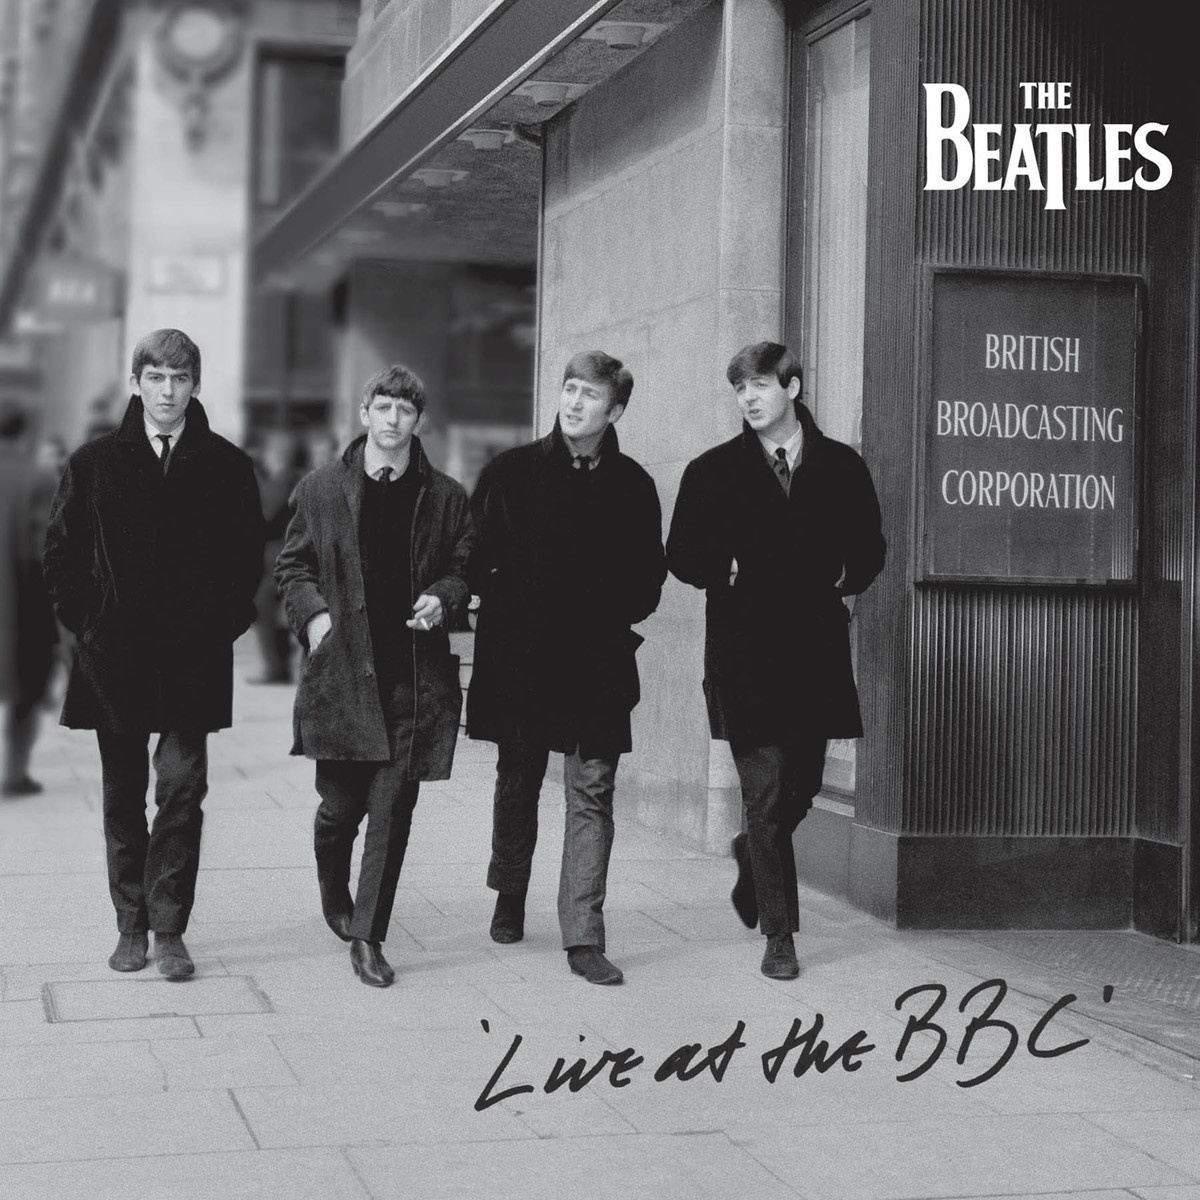 I Wanna Be Your Man (Live At The BBC For "From Us To You Say The Beatles" / 30th March, 1964)